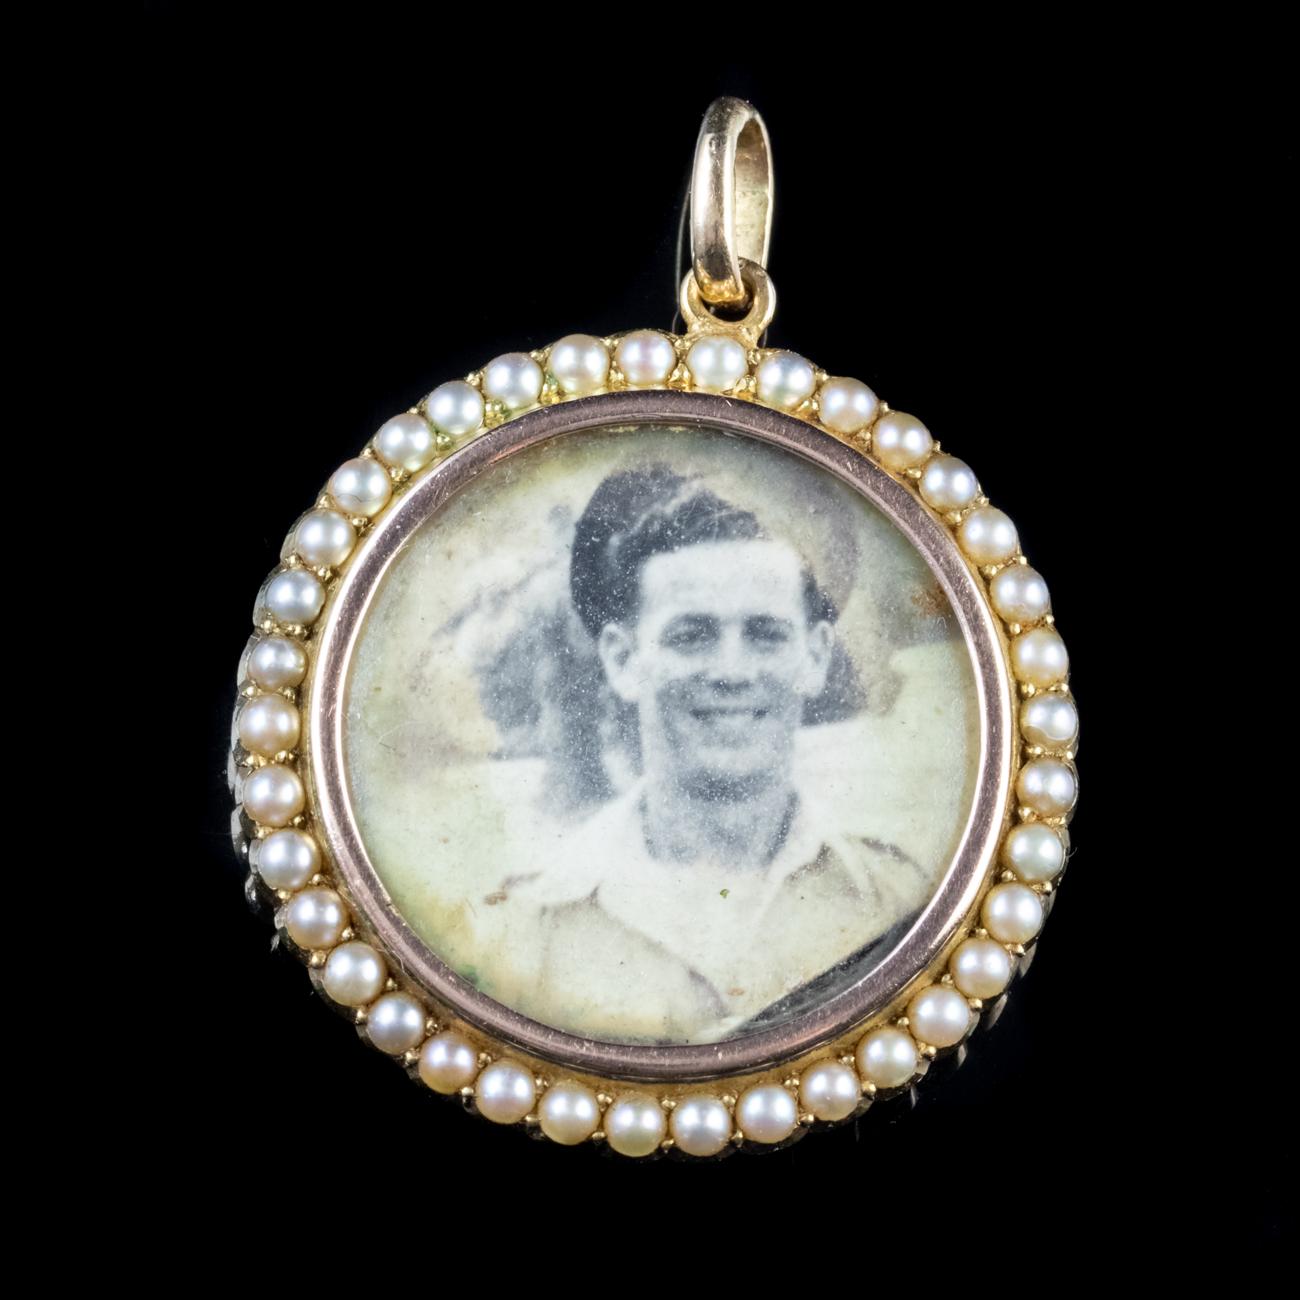 This beautiful pendant locket has been modelled in 15ct Yellow Gold and set with 36 lovely Pearls around its edge. It also features a bale so to be hung from a chain.

The locket features glazed windows with Gold rims on each side to hold